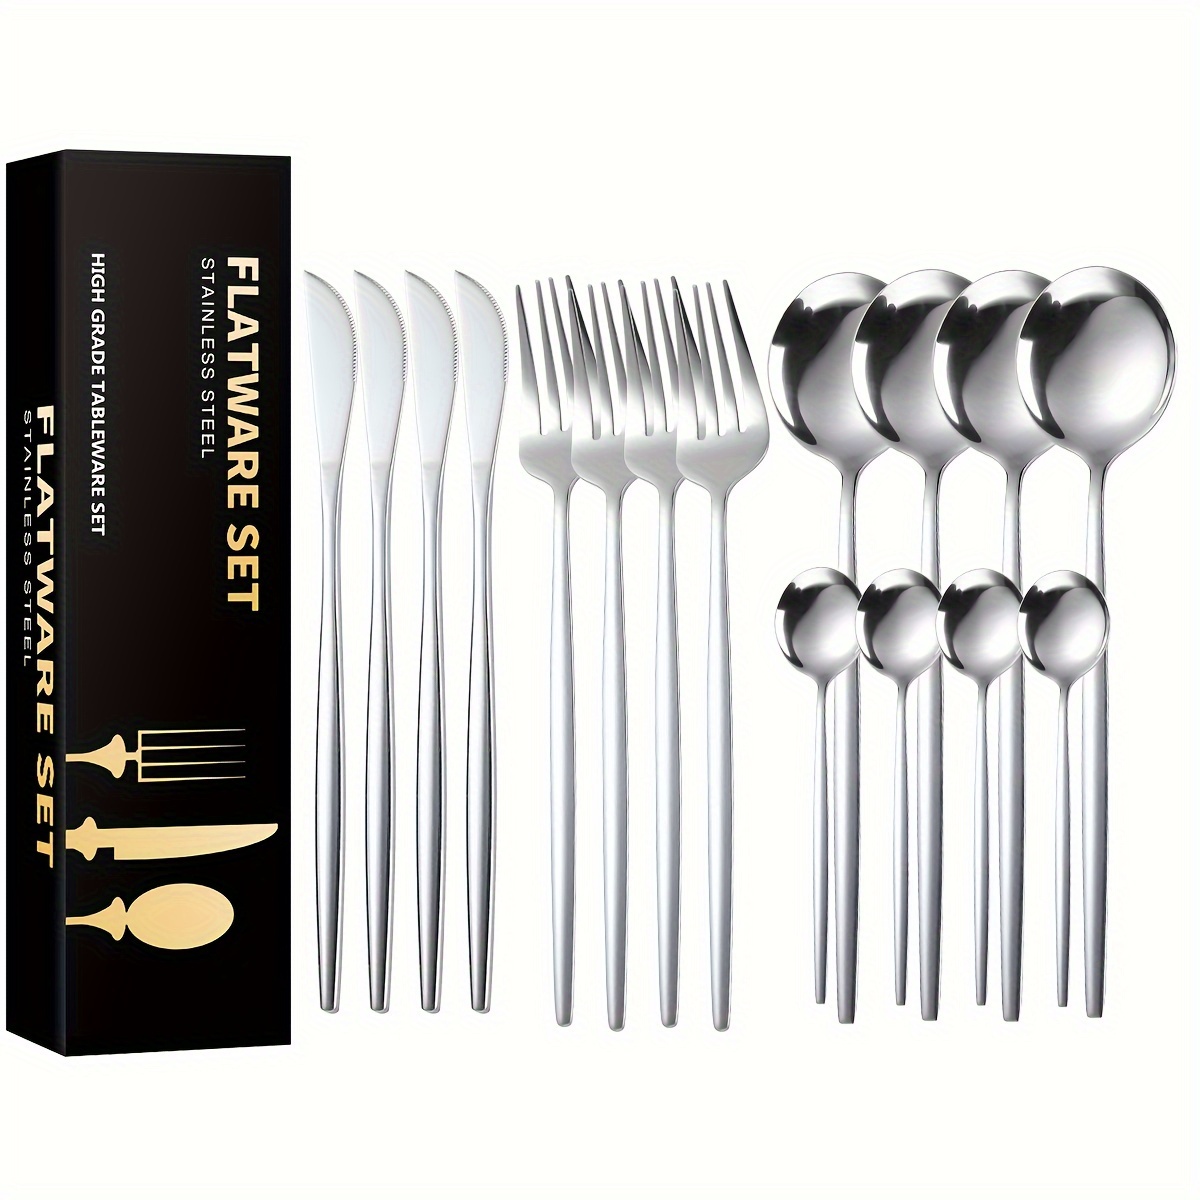 6/12Pieces Dinner Spoon Set, 7.99in Tablespoons, Silverware Spoons,  Stainless Steel Spoons Set For Eating Soup, Cereal - Mirror Polished  Dishwasher Sa